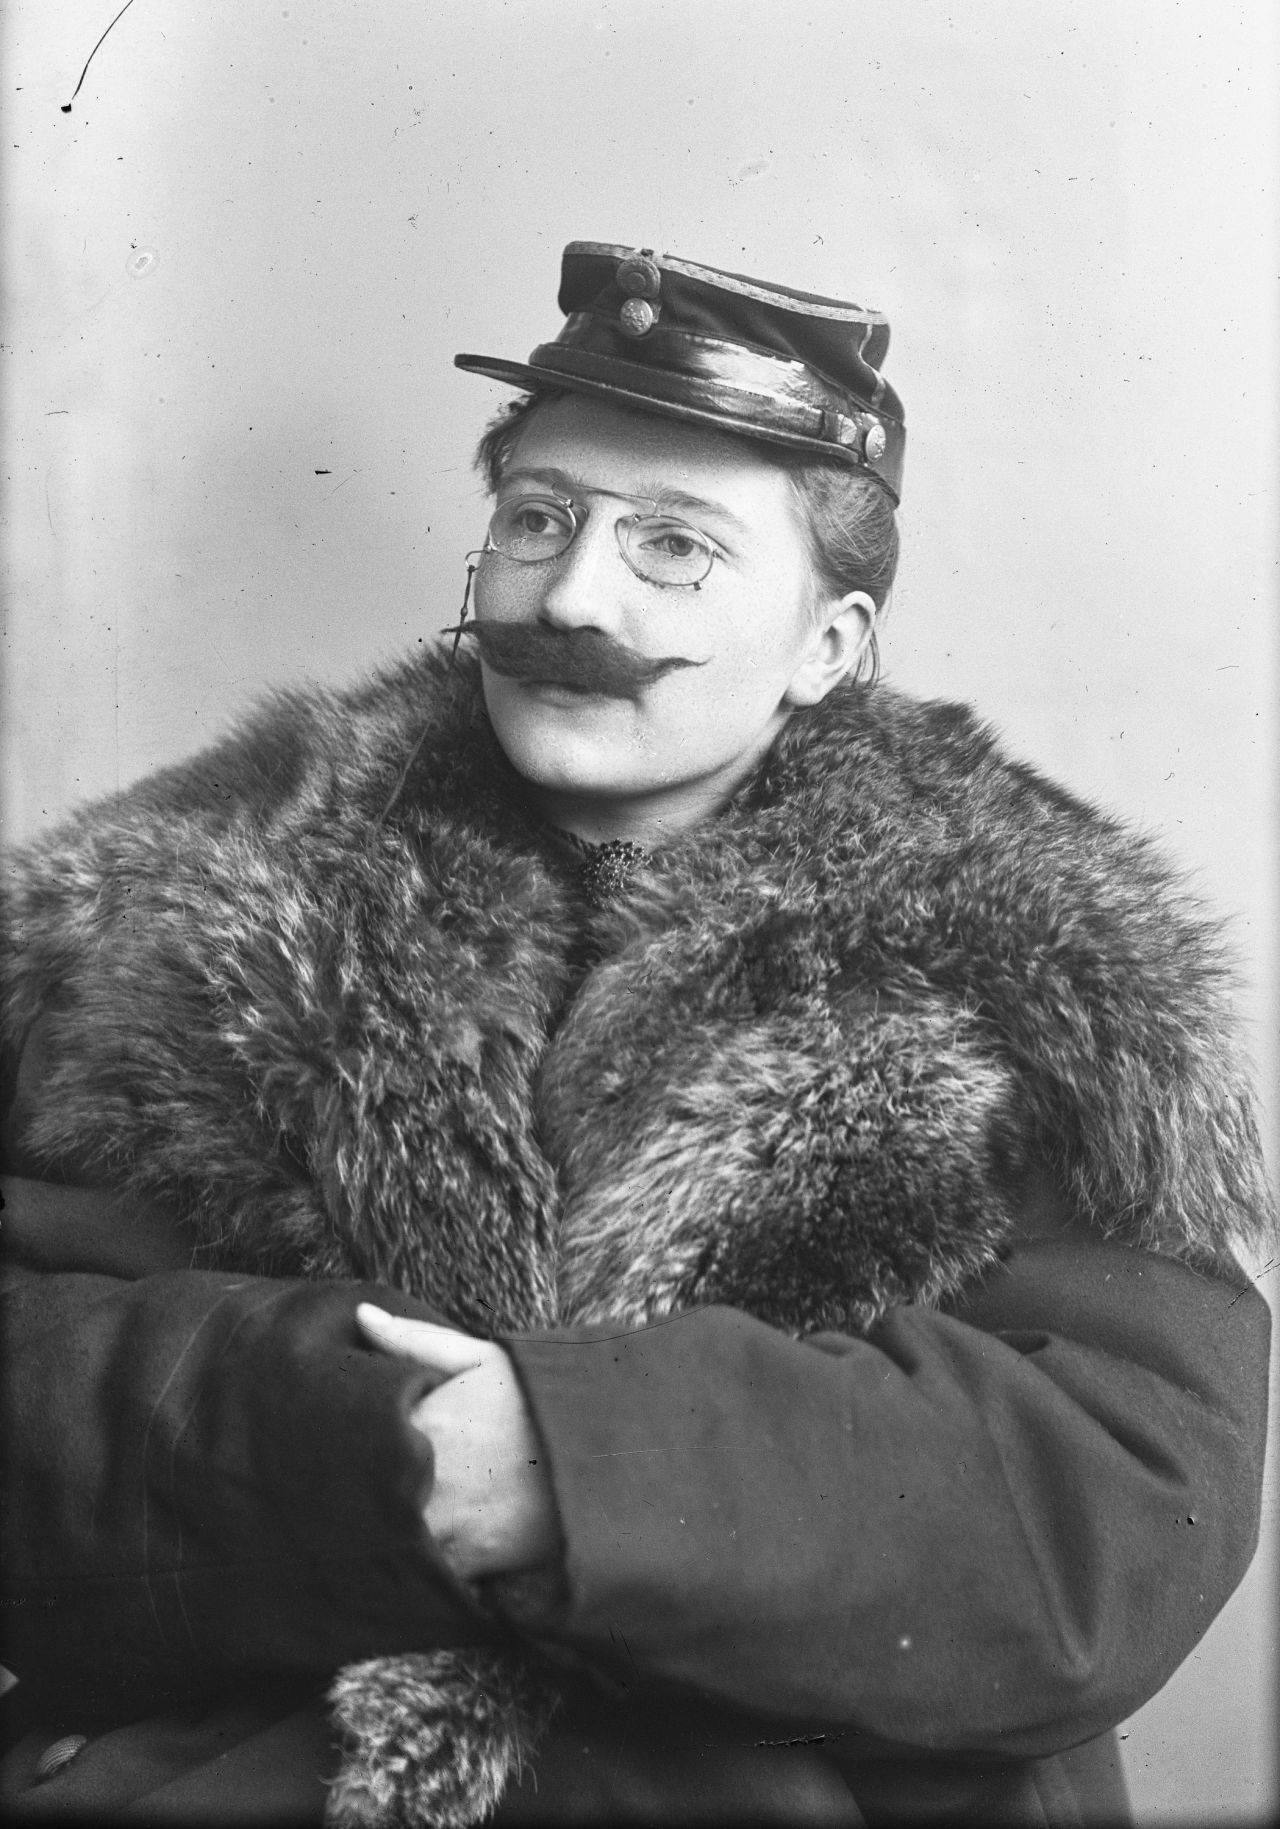 Bolette Berg pictured with a handlebar mustache. Little is known about Berg, and she has received less attention than Høeg, though they were lifelong creative, business and romantic partners.